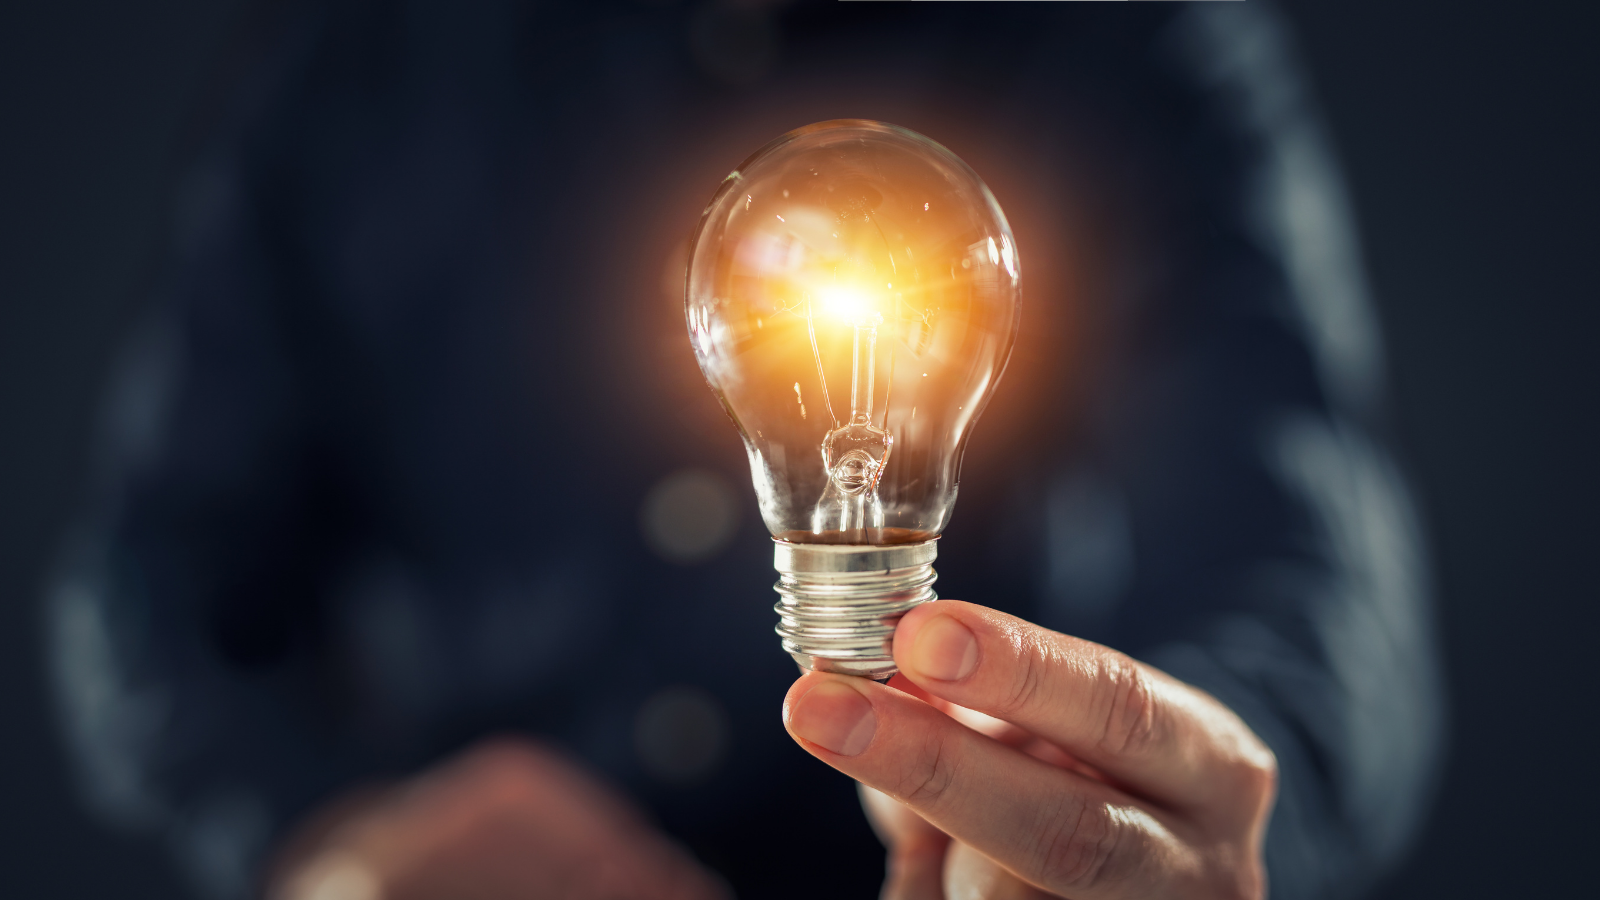 Man holding a lit up lightbulb indicating new ideas for leading sales teams.